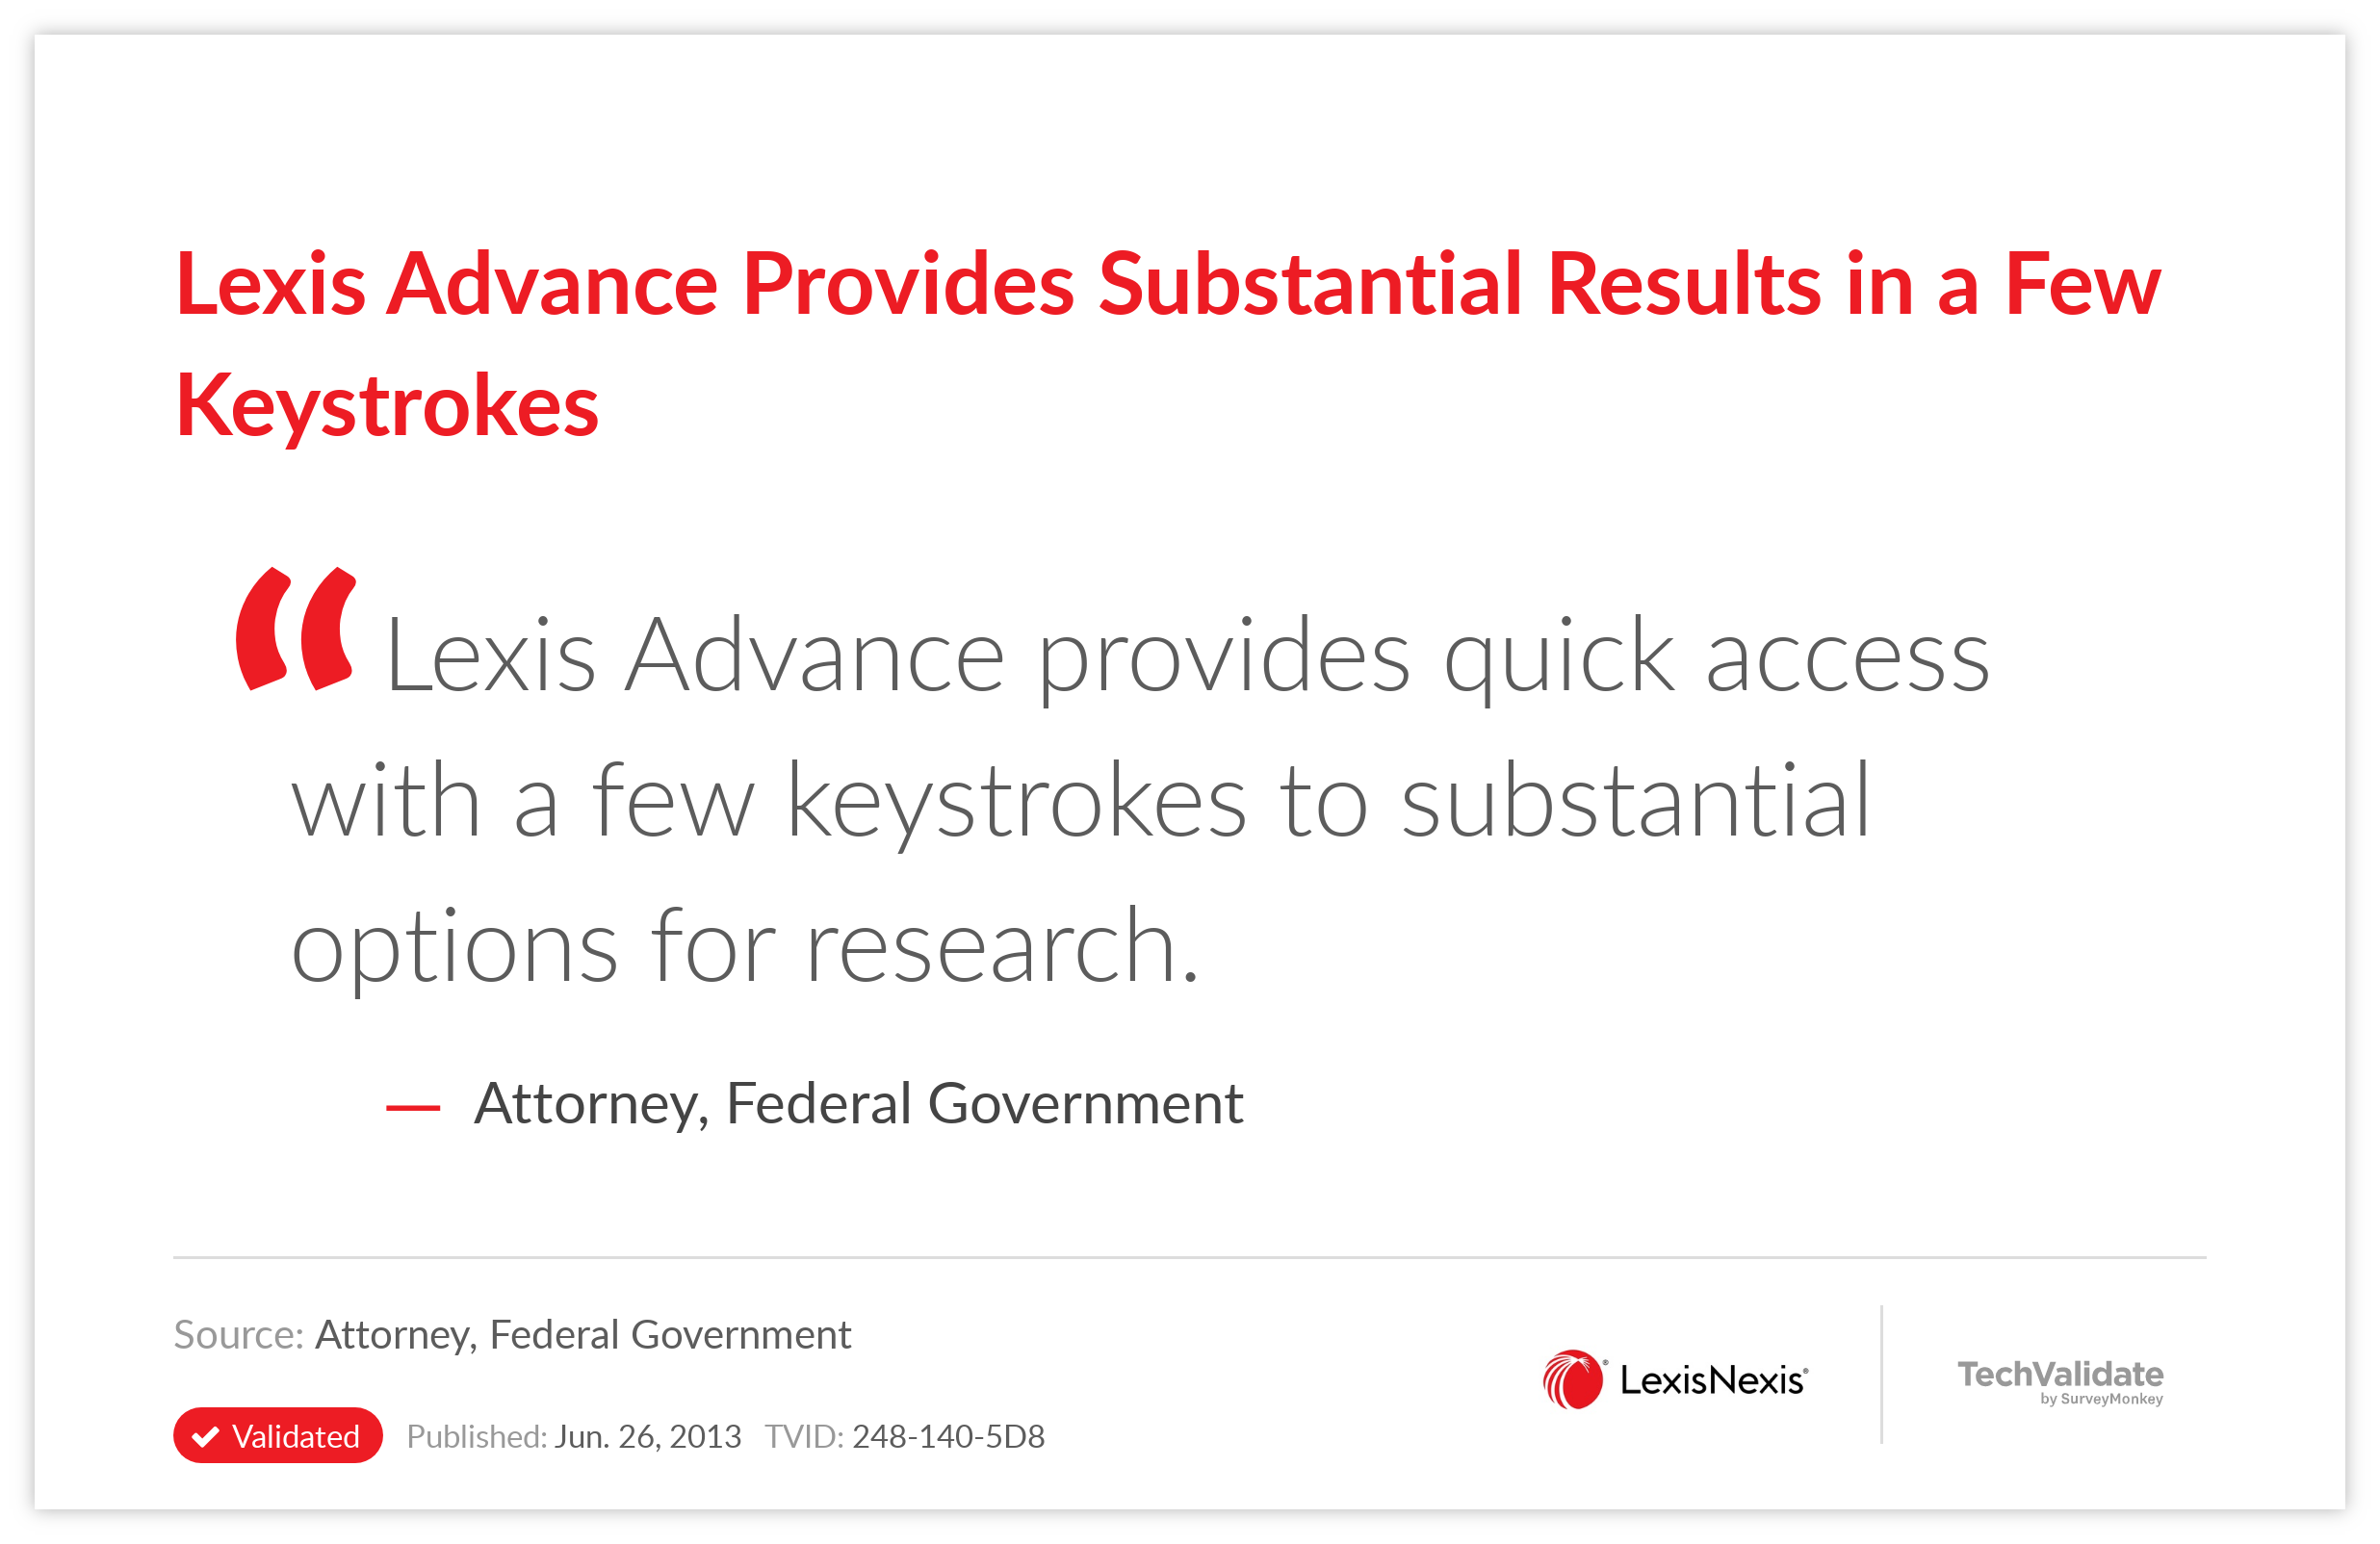 Lexis Advance Provides Substantial Results in a Few Keystrokes